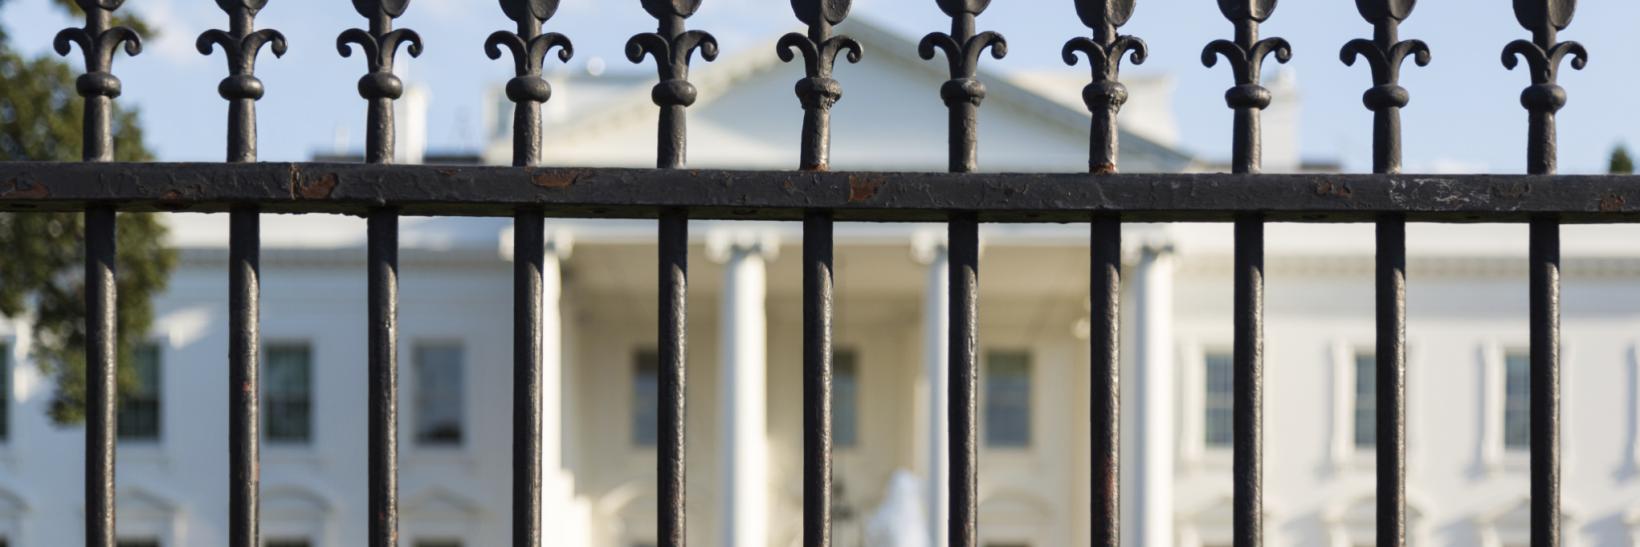 the White House front gate